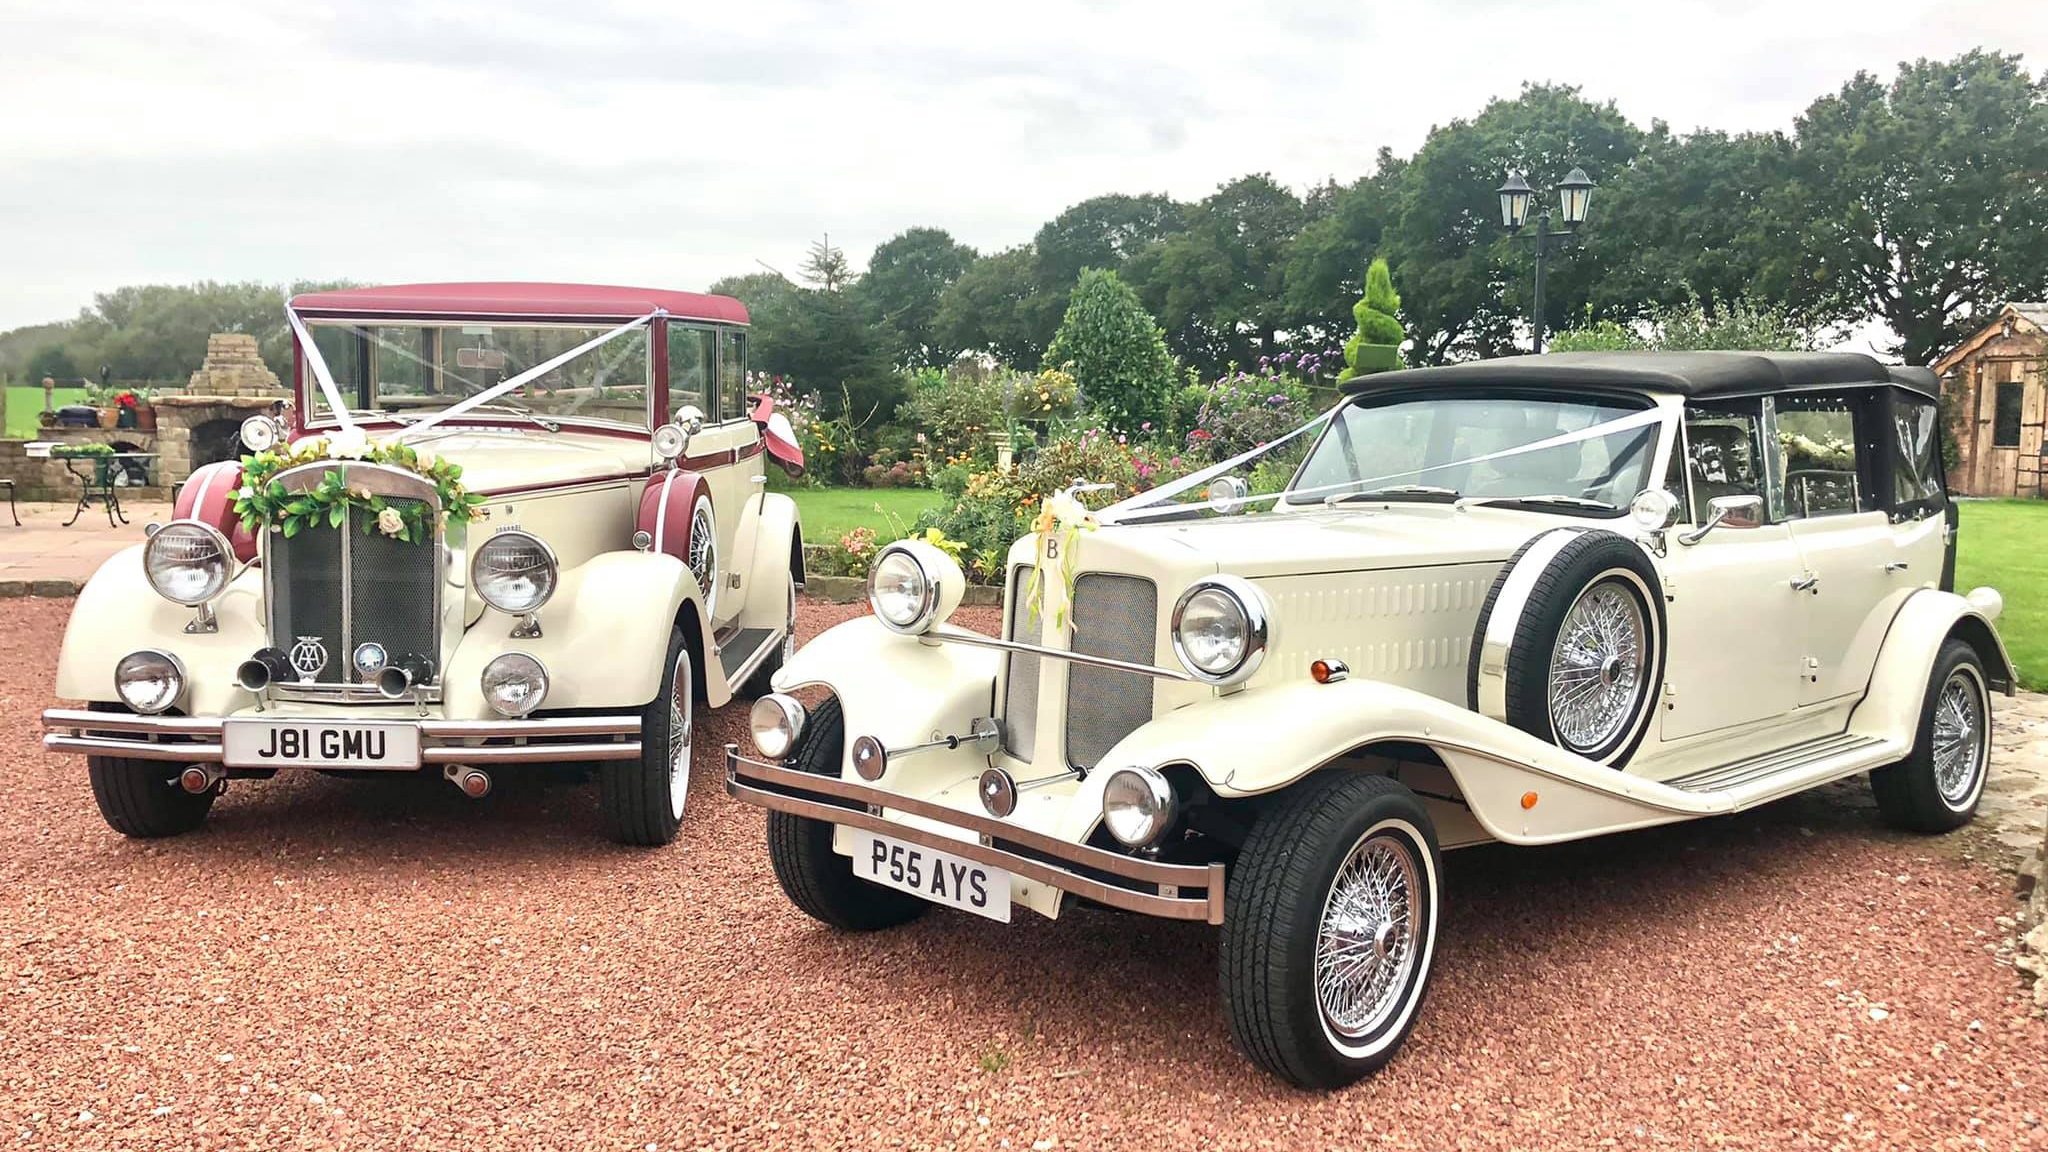 Two vintage wedding cars decorated with white ribbons and bows at a local Leyland wedding. Both vehicles are parked side-by-side